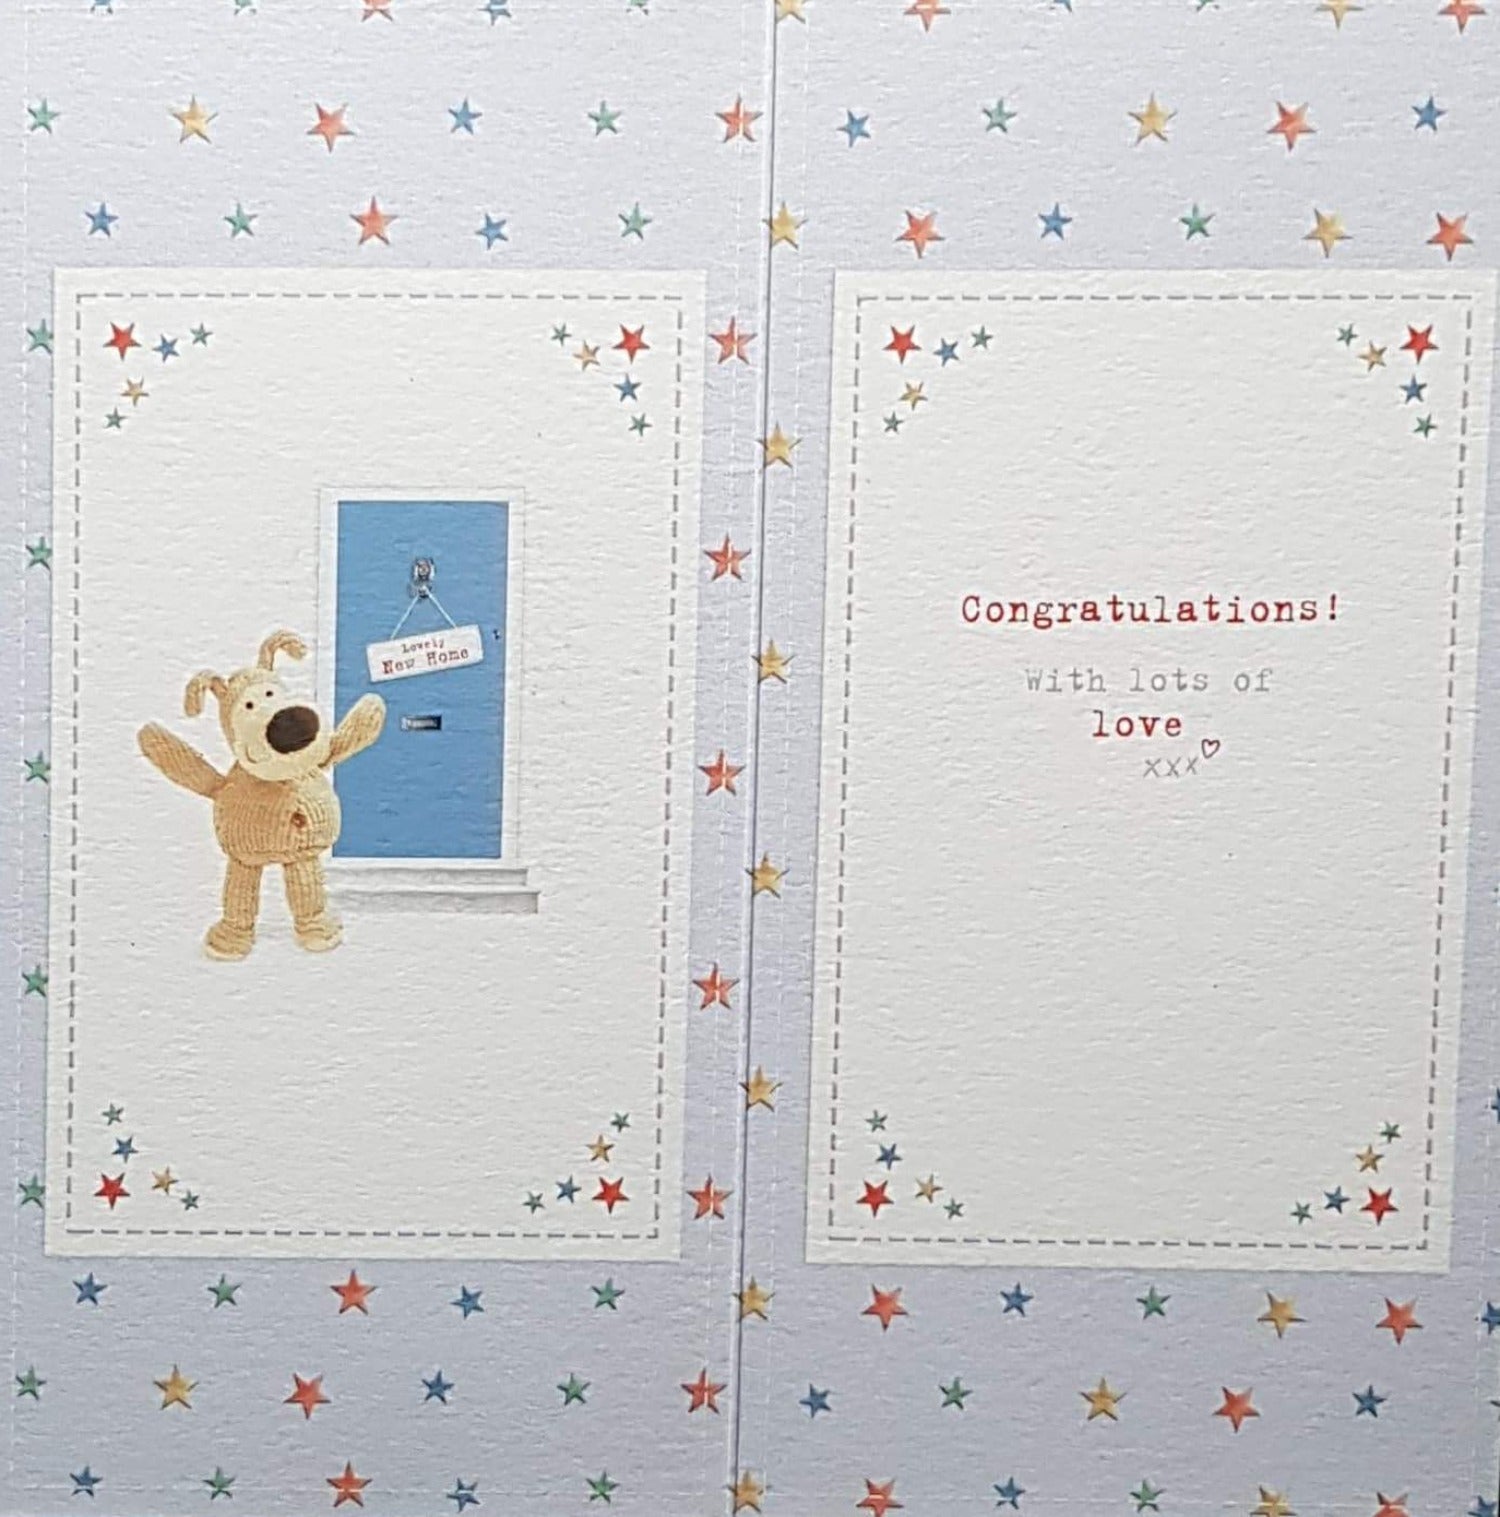 Congratulations Card - New Home / 'Lovely New Home' & A Stuffed Dog At The Door